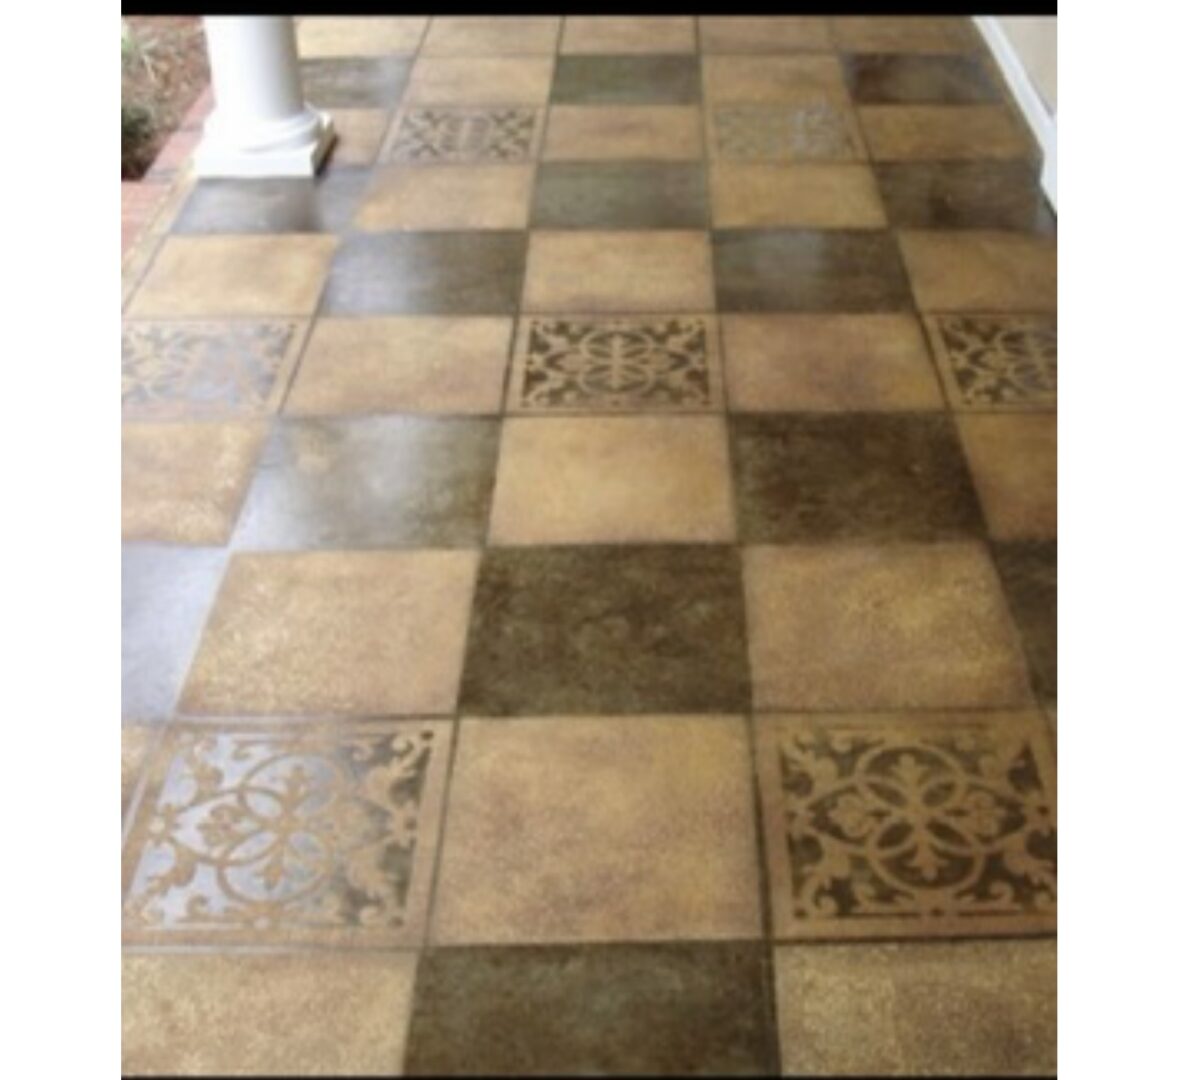 A floor with different colored tiles on it